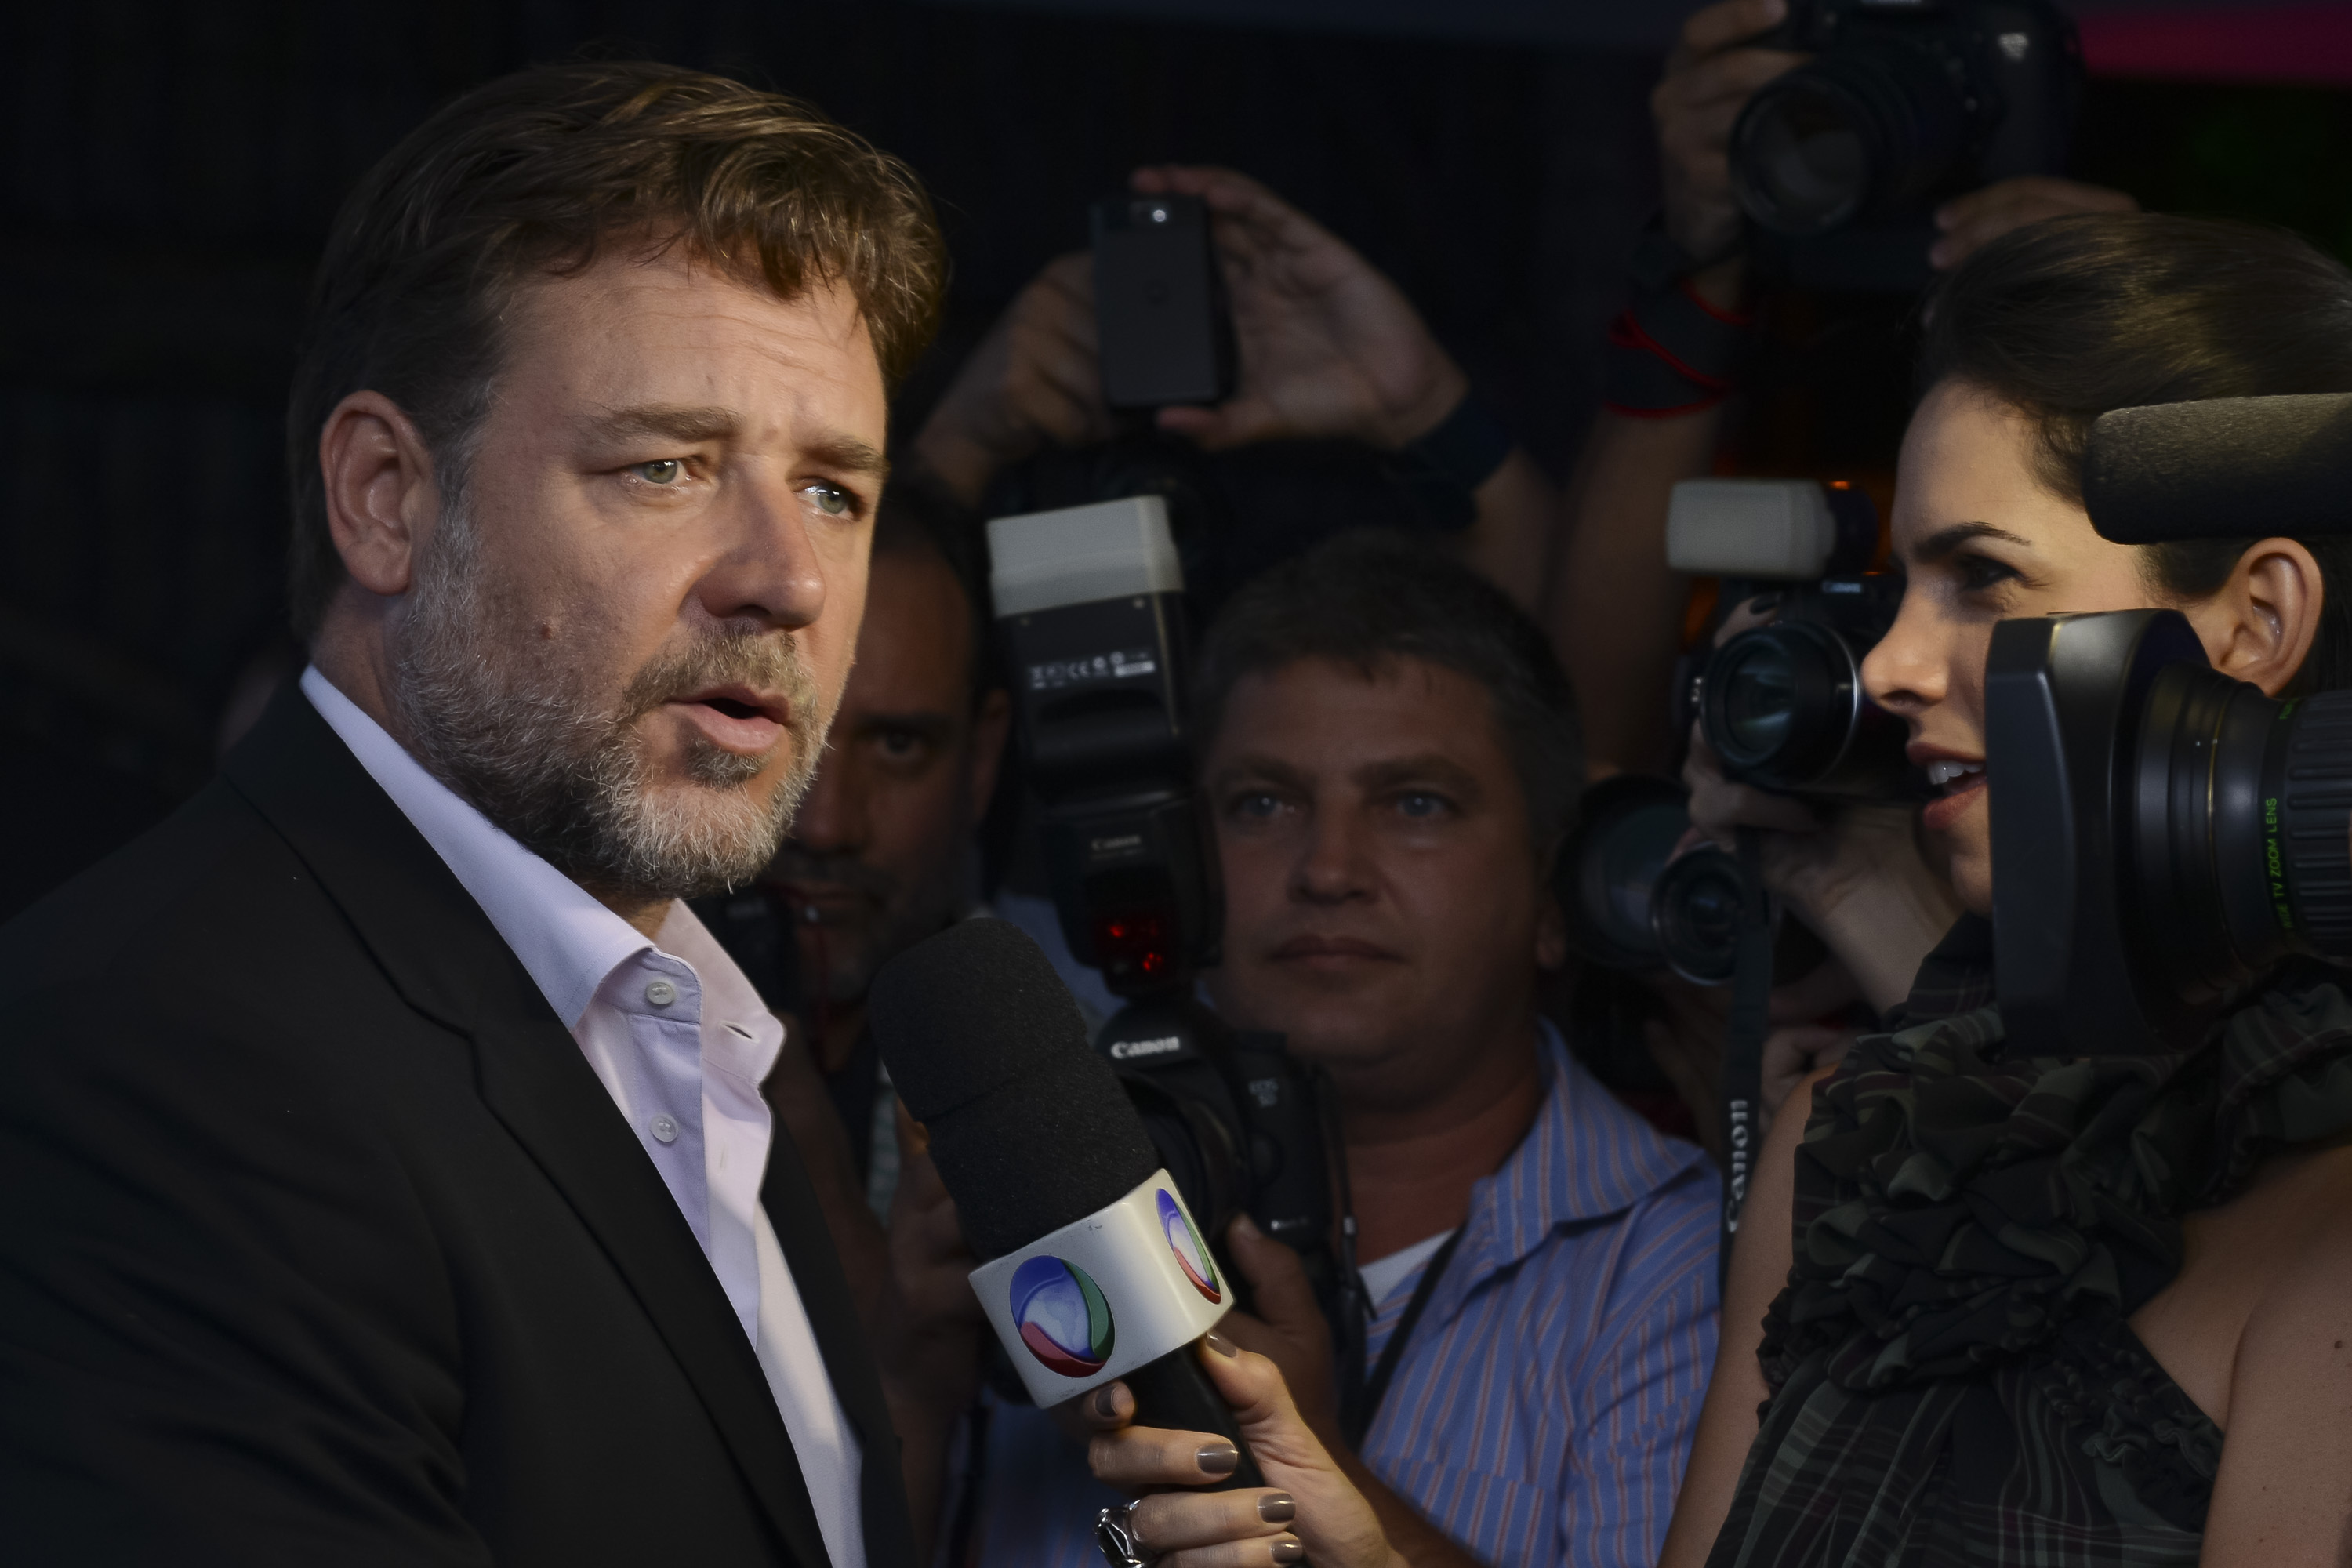 Russell Crowe attends the premiere of <i>Noah</i> in Rio de Janeiro on March 12, 2014. He said the banning of the film in some Muslim countries was "not unexpected" (Getty Images)